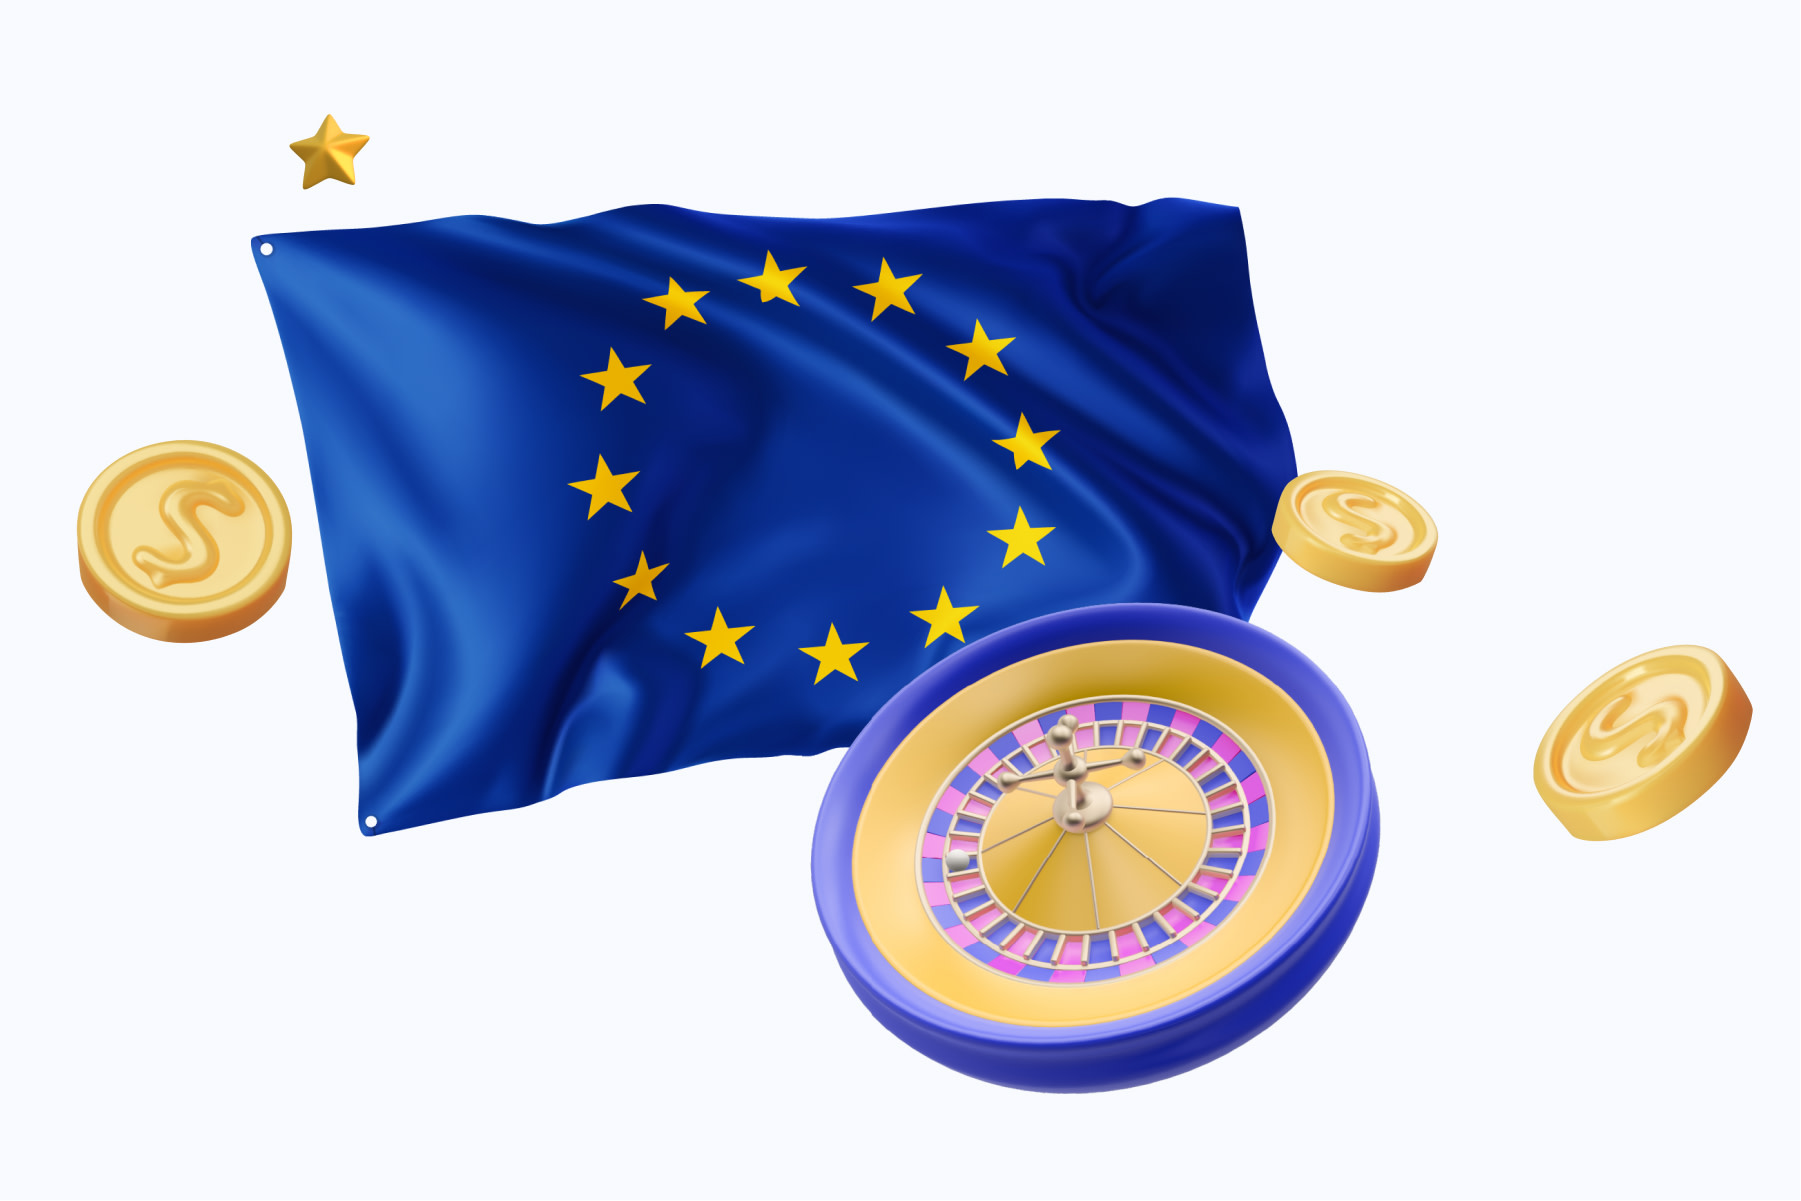 Image of an EU flag with a Roulette wheel